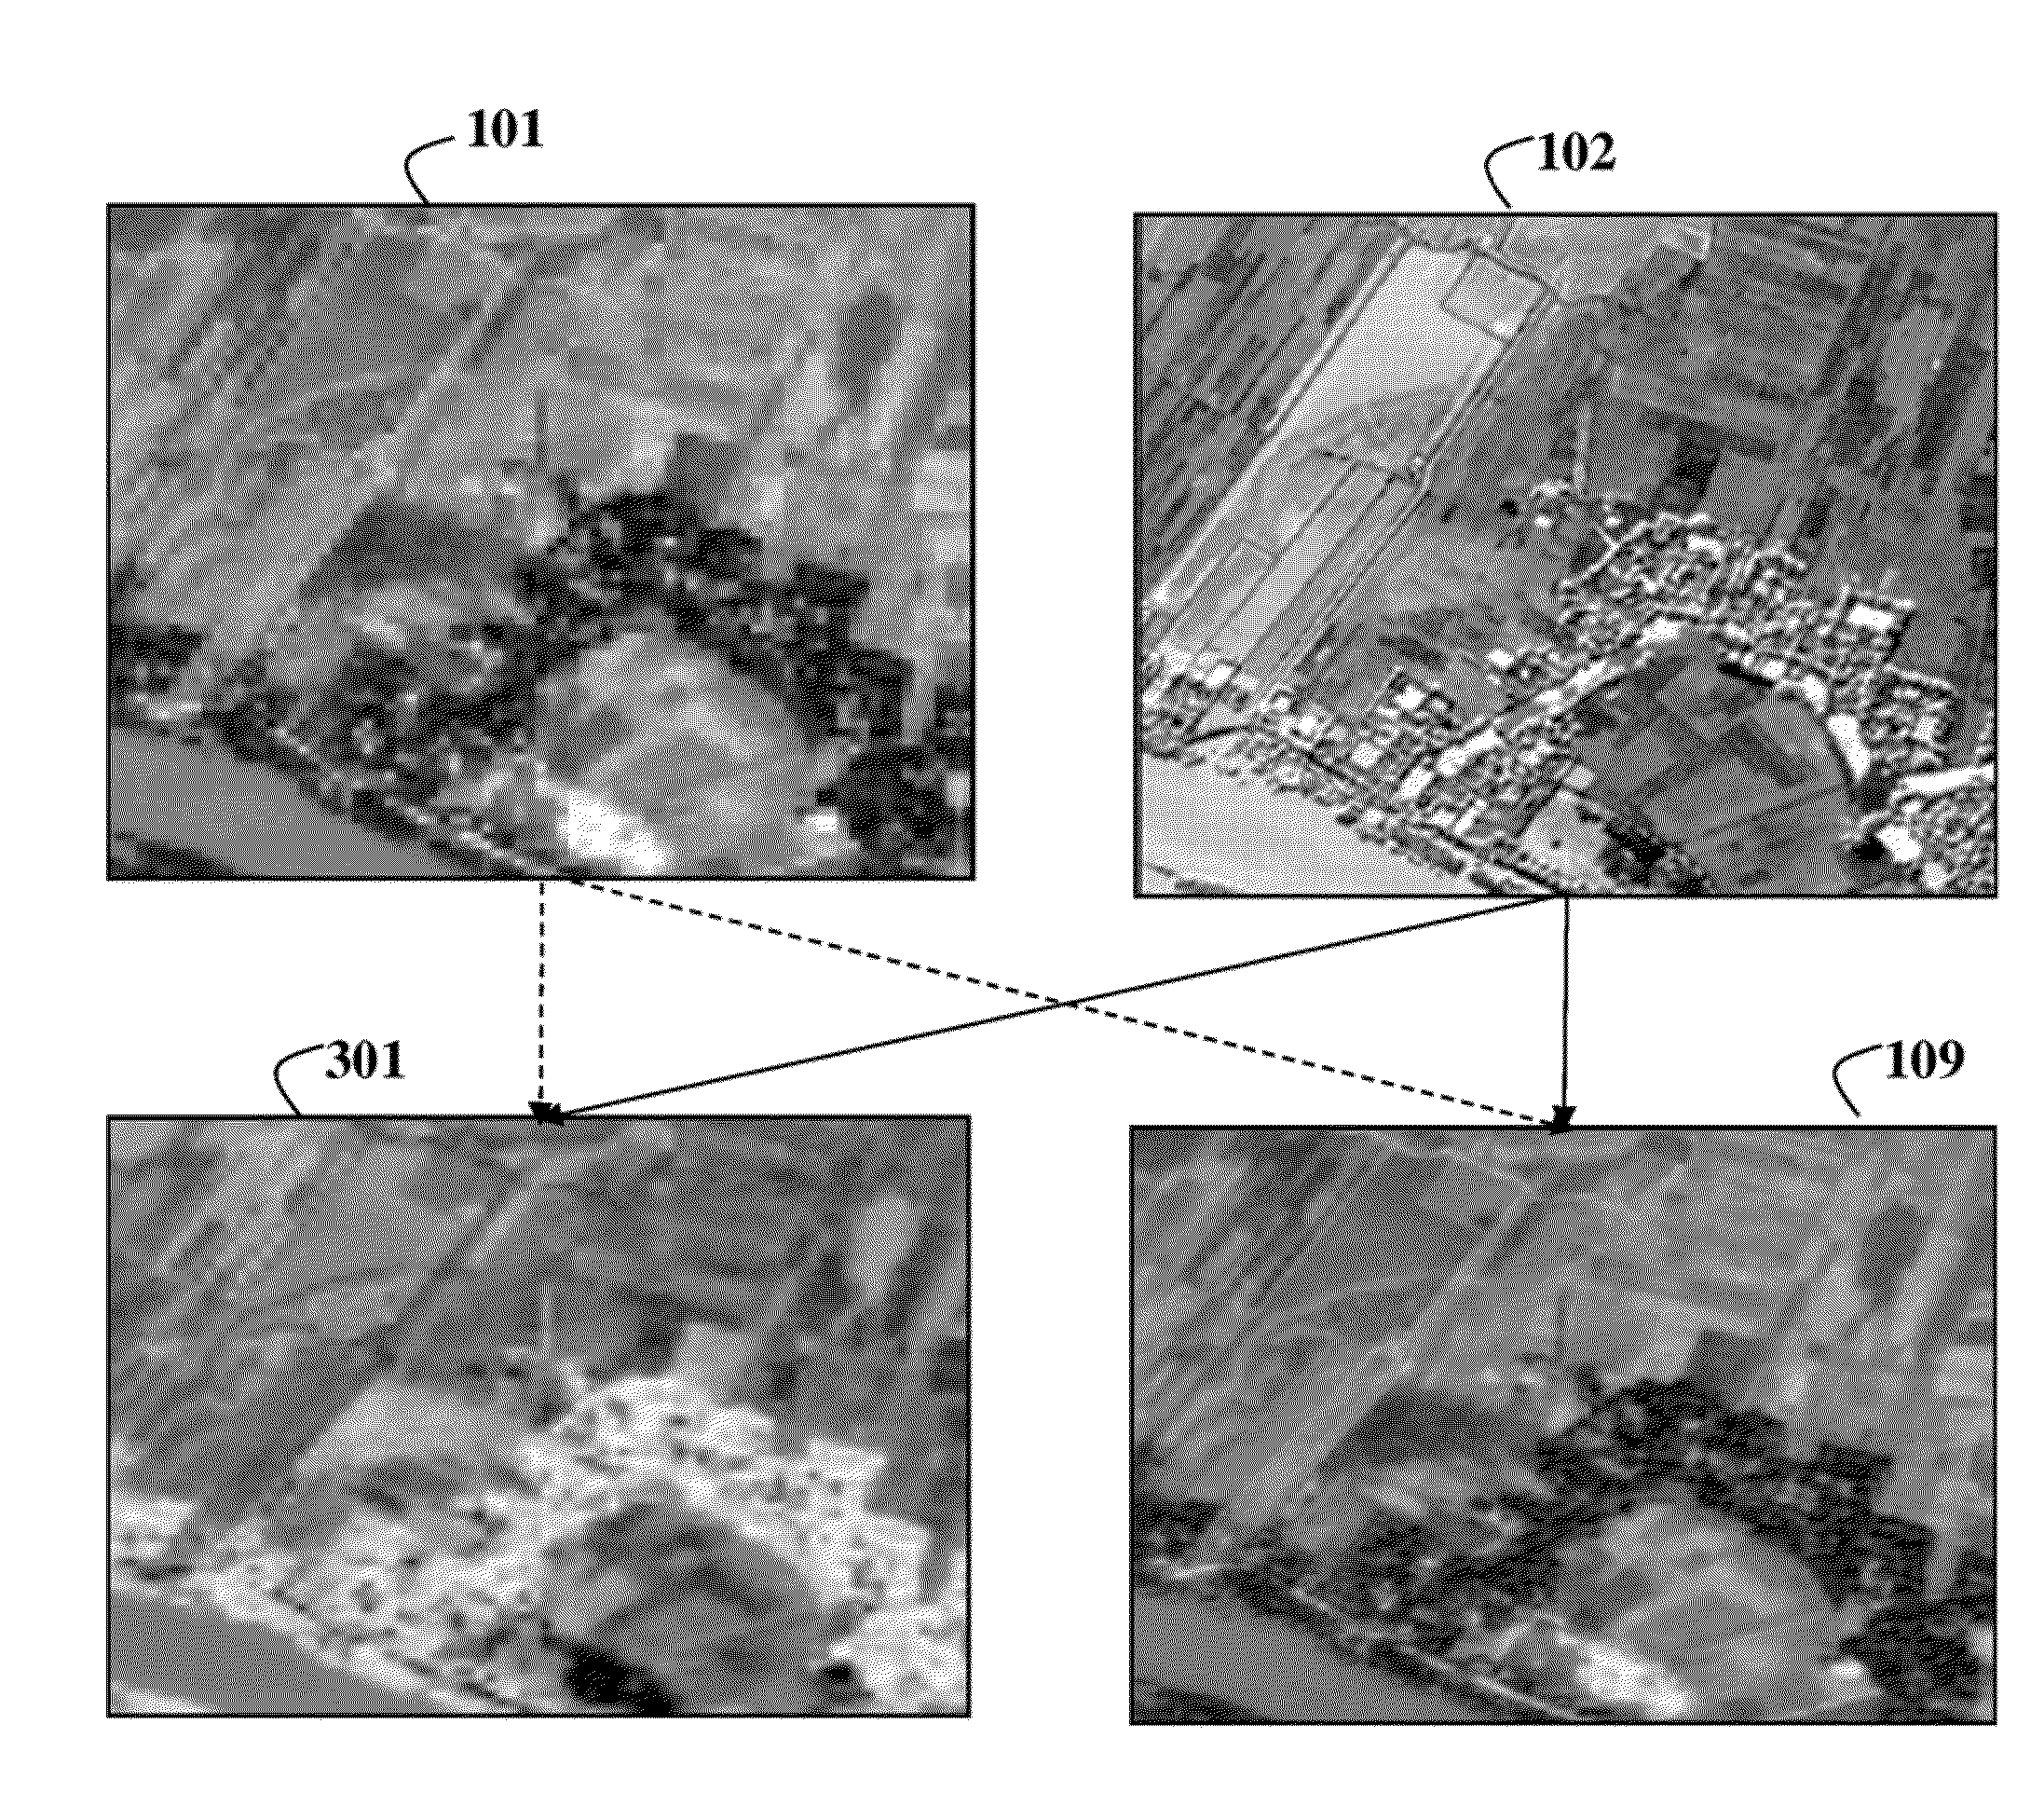 Method for Pan-Sharpening Panchromatic and Multispectral Images Using Dictionaries